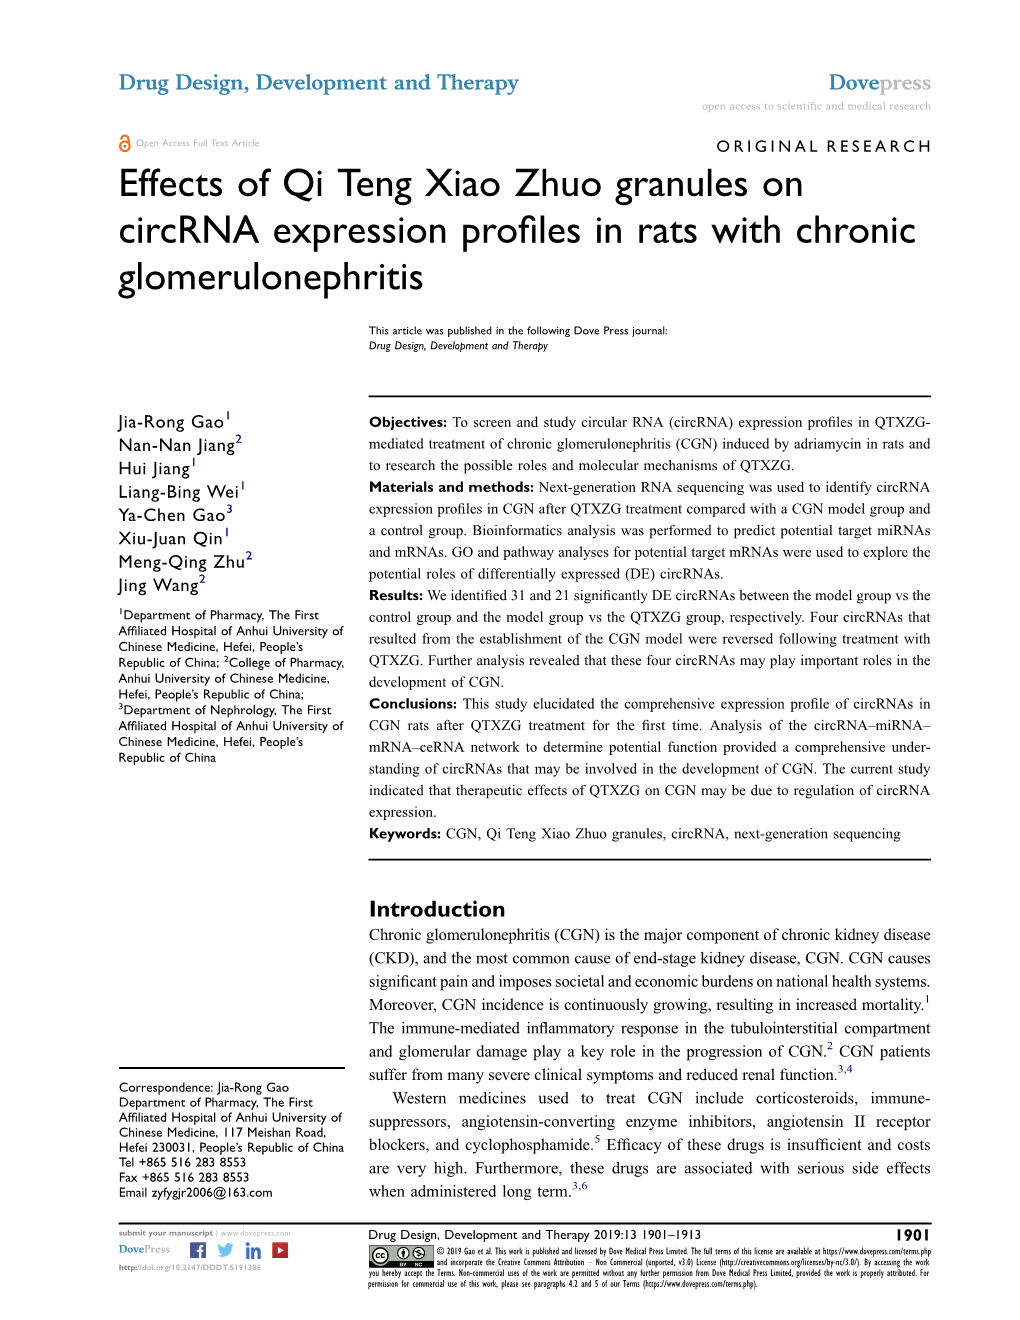 Effects of Qi Teng Xiao Zhuo Granules on Circrna Expression Profiles In